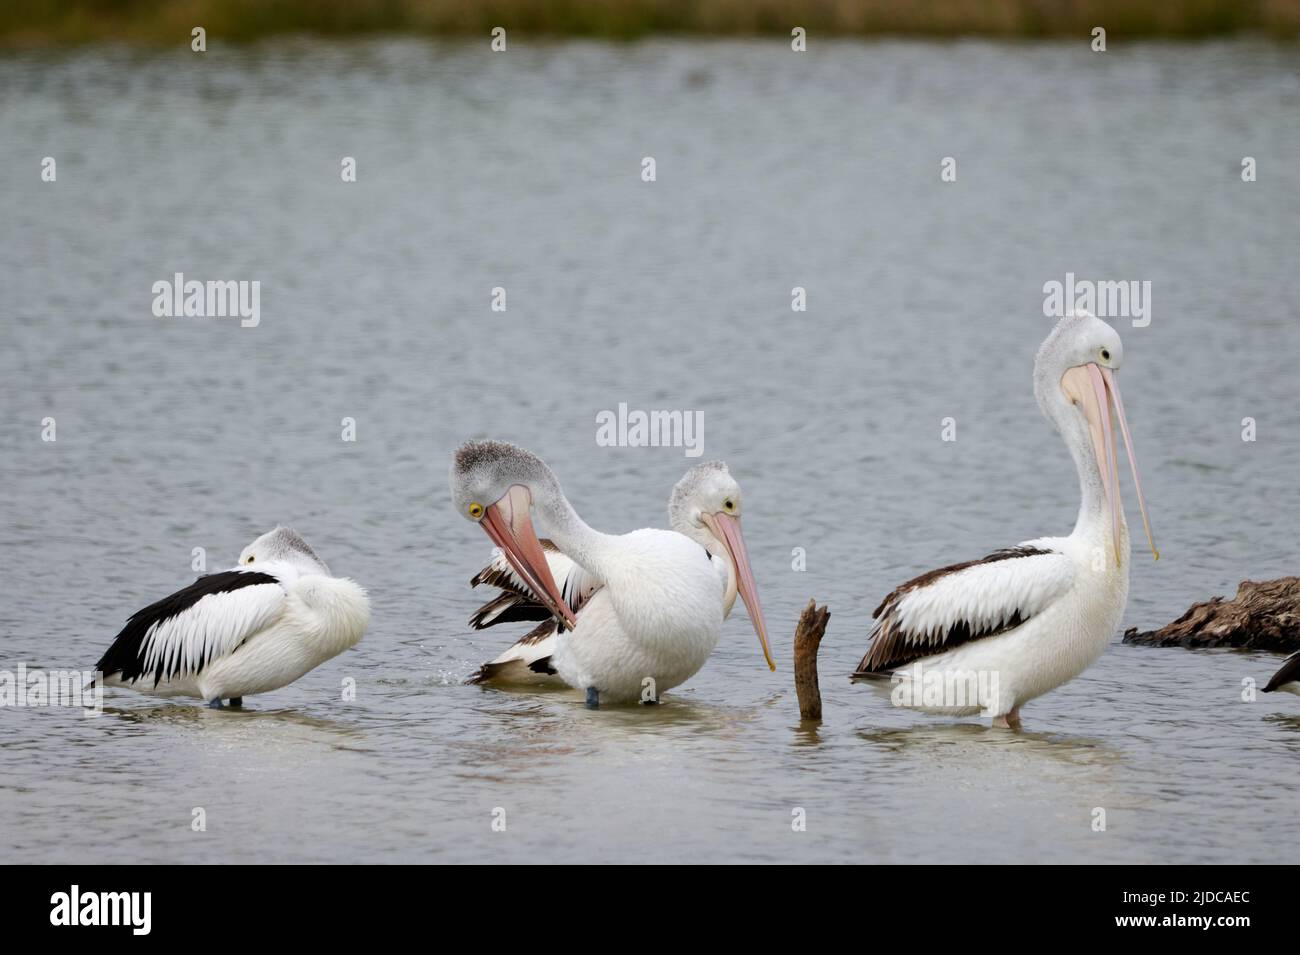 Four pelicans on the waters edge of a billabong in northwestern Victoria, Australia. Stock Photo